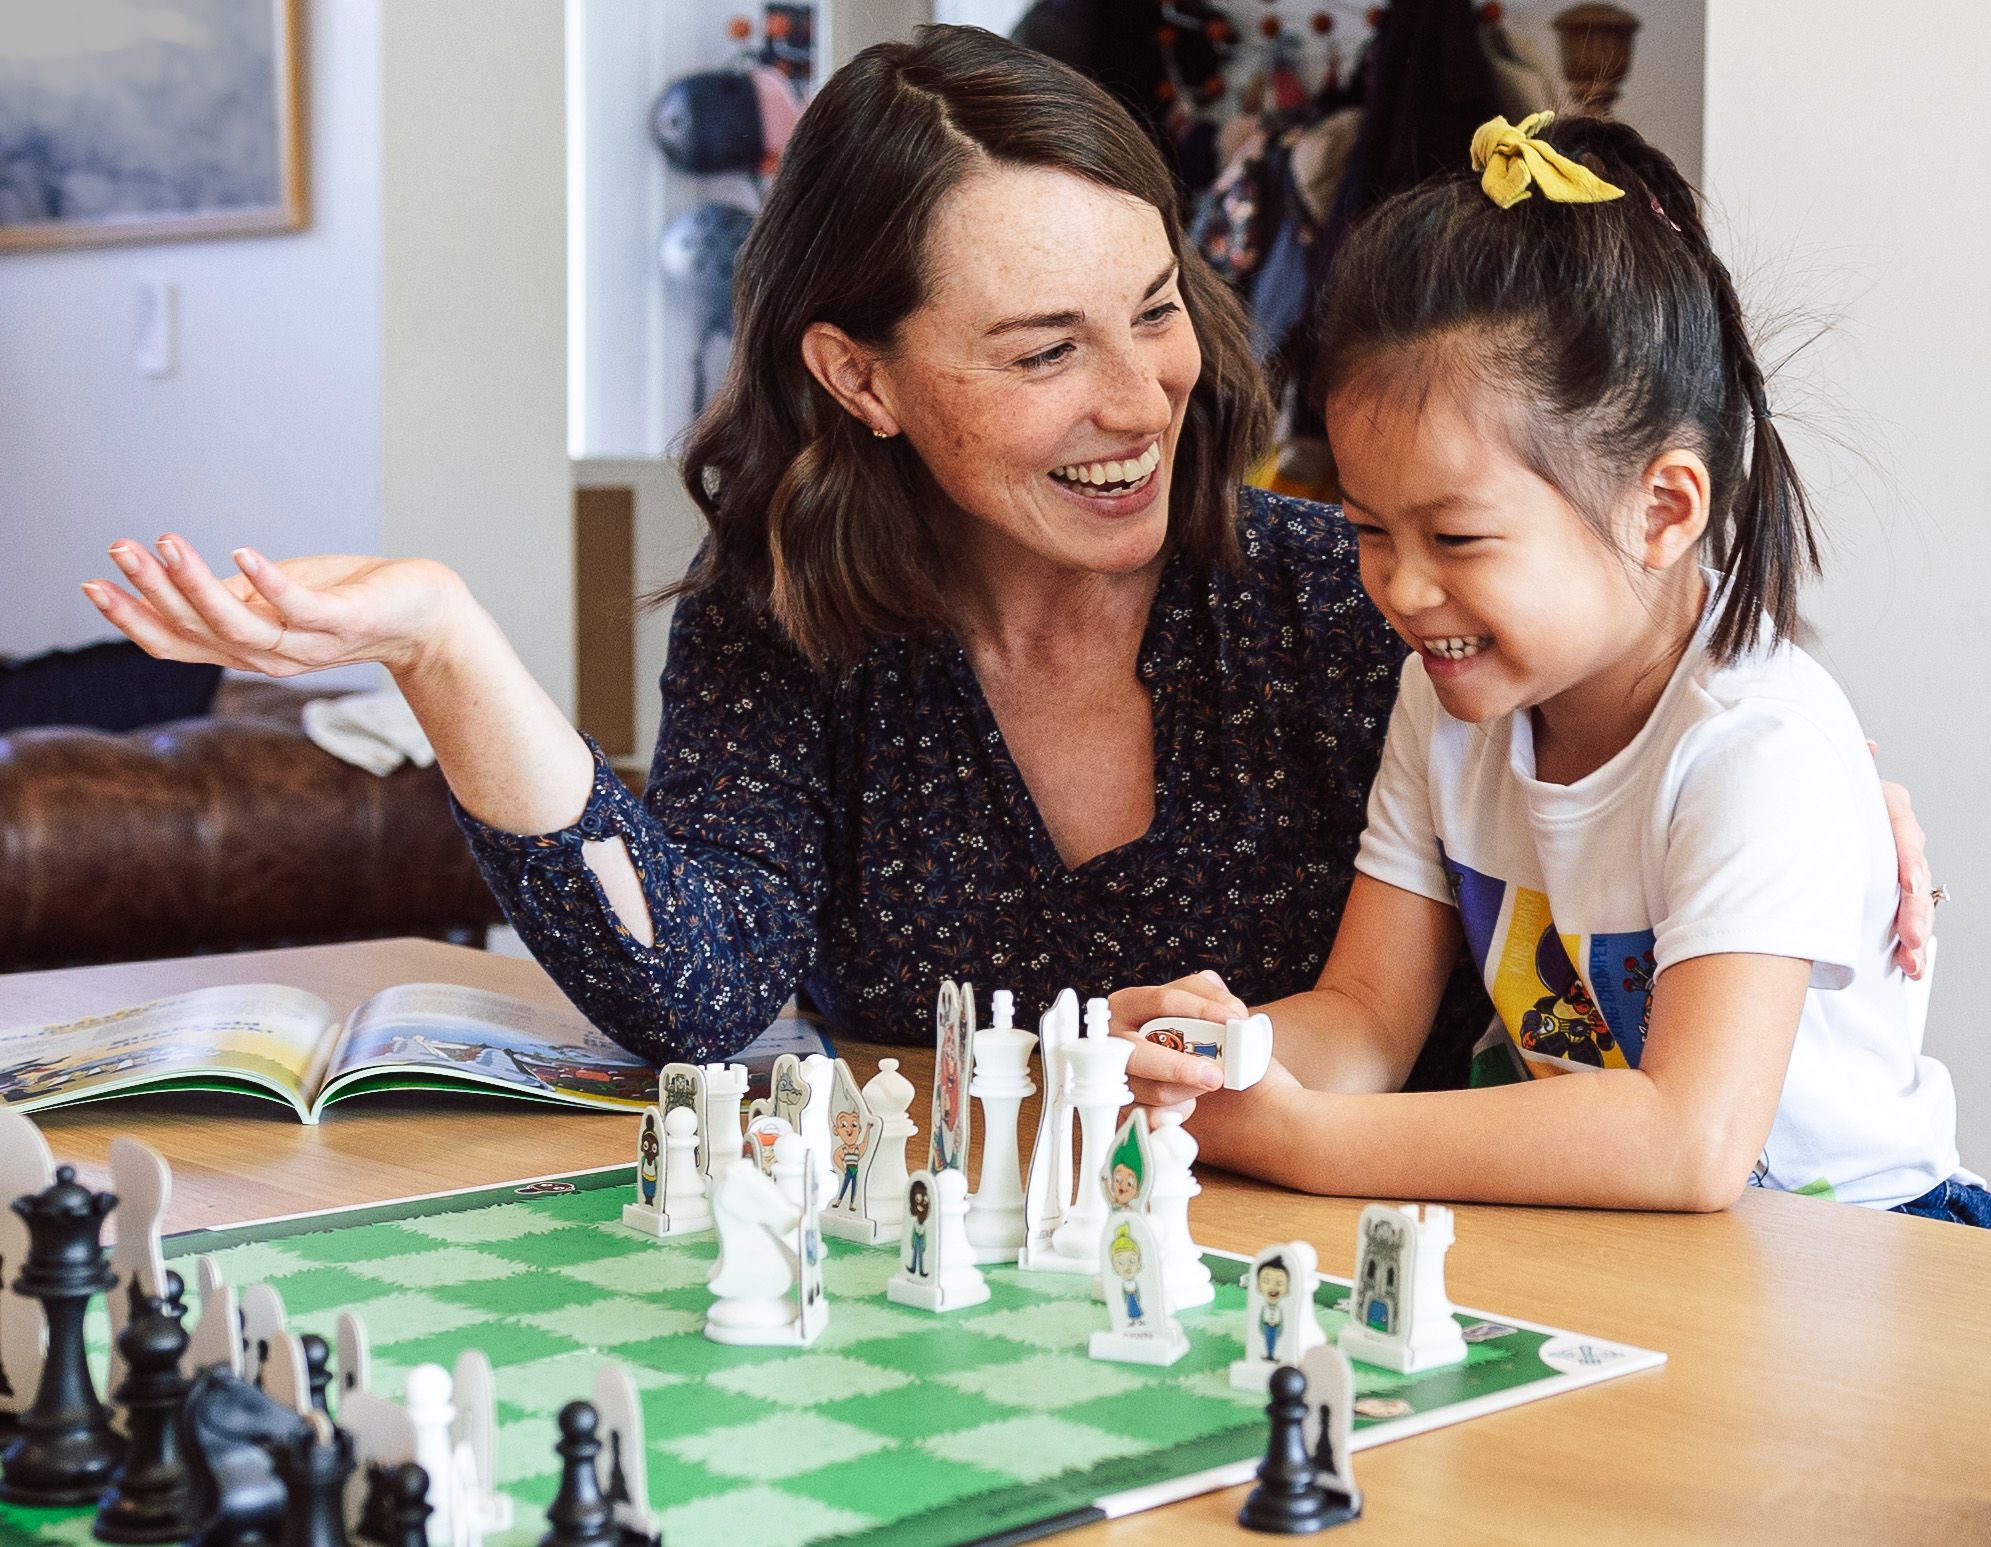 7 Life Lessons Chess Can Teach Your Child